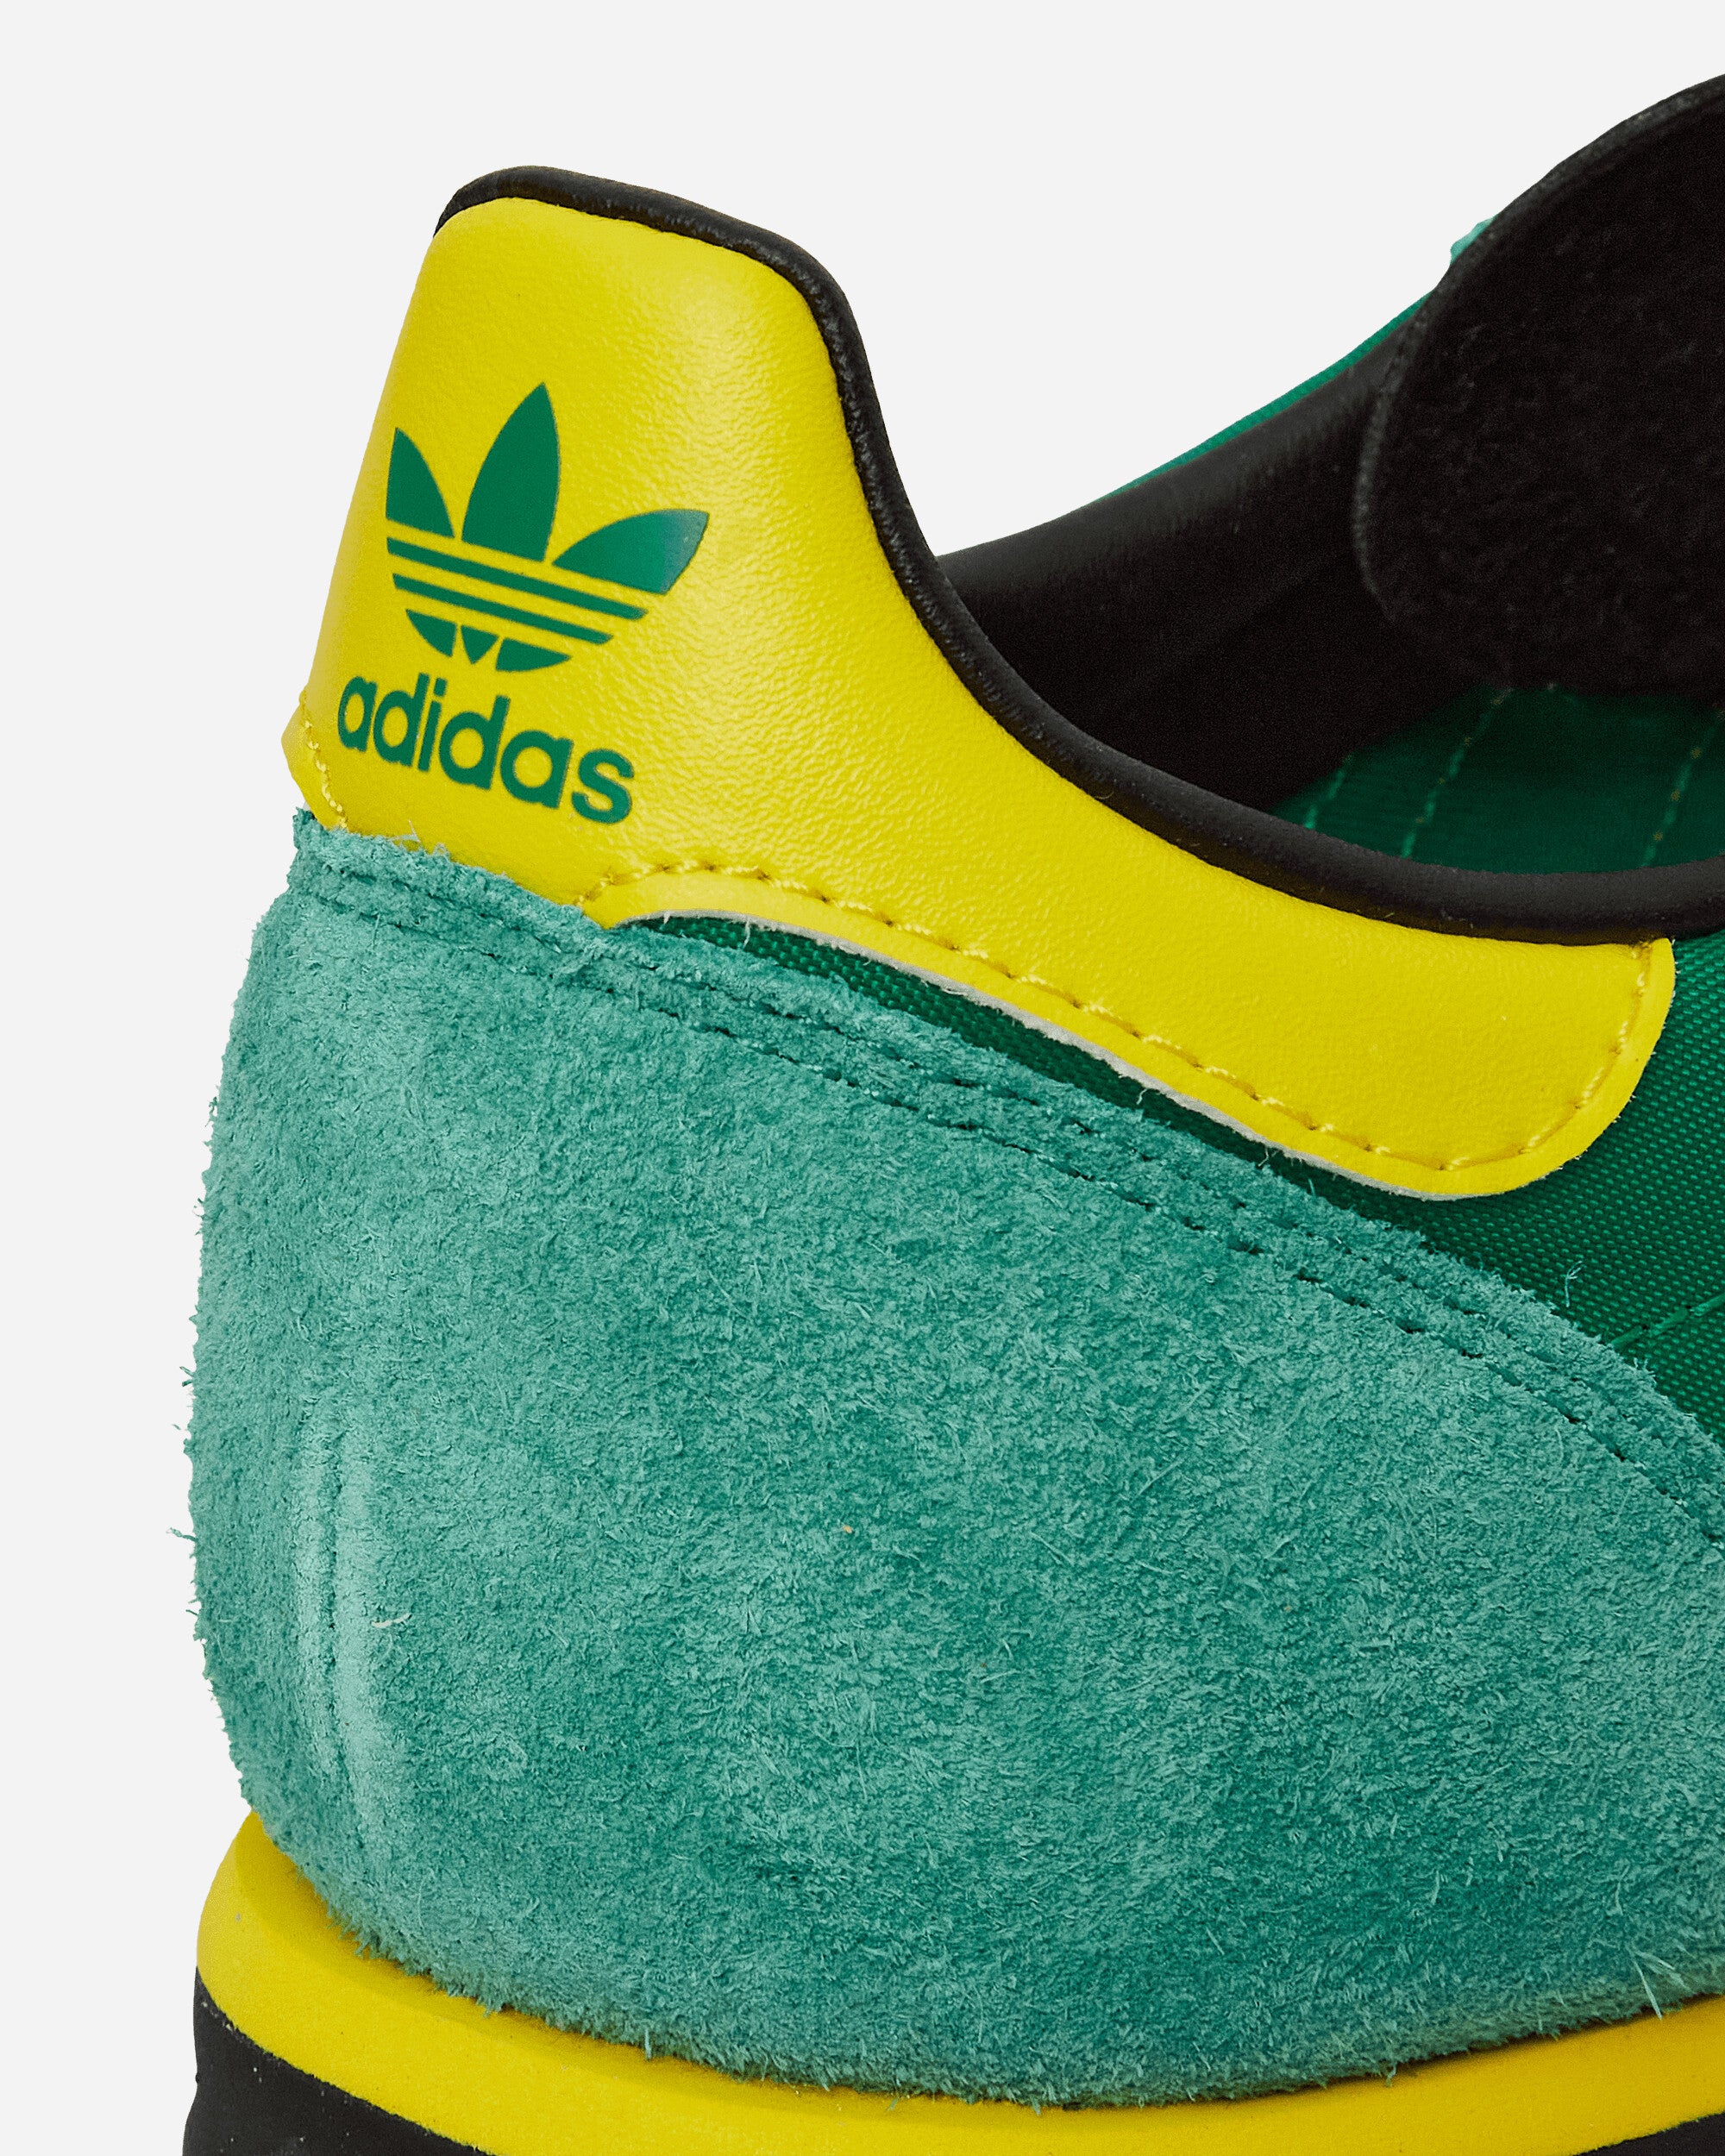 adidas Sl 72 Rs Green/Yellow Sneakers Low IG2133 001